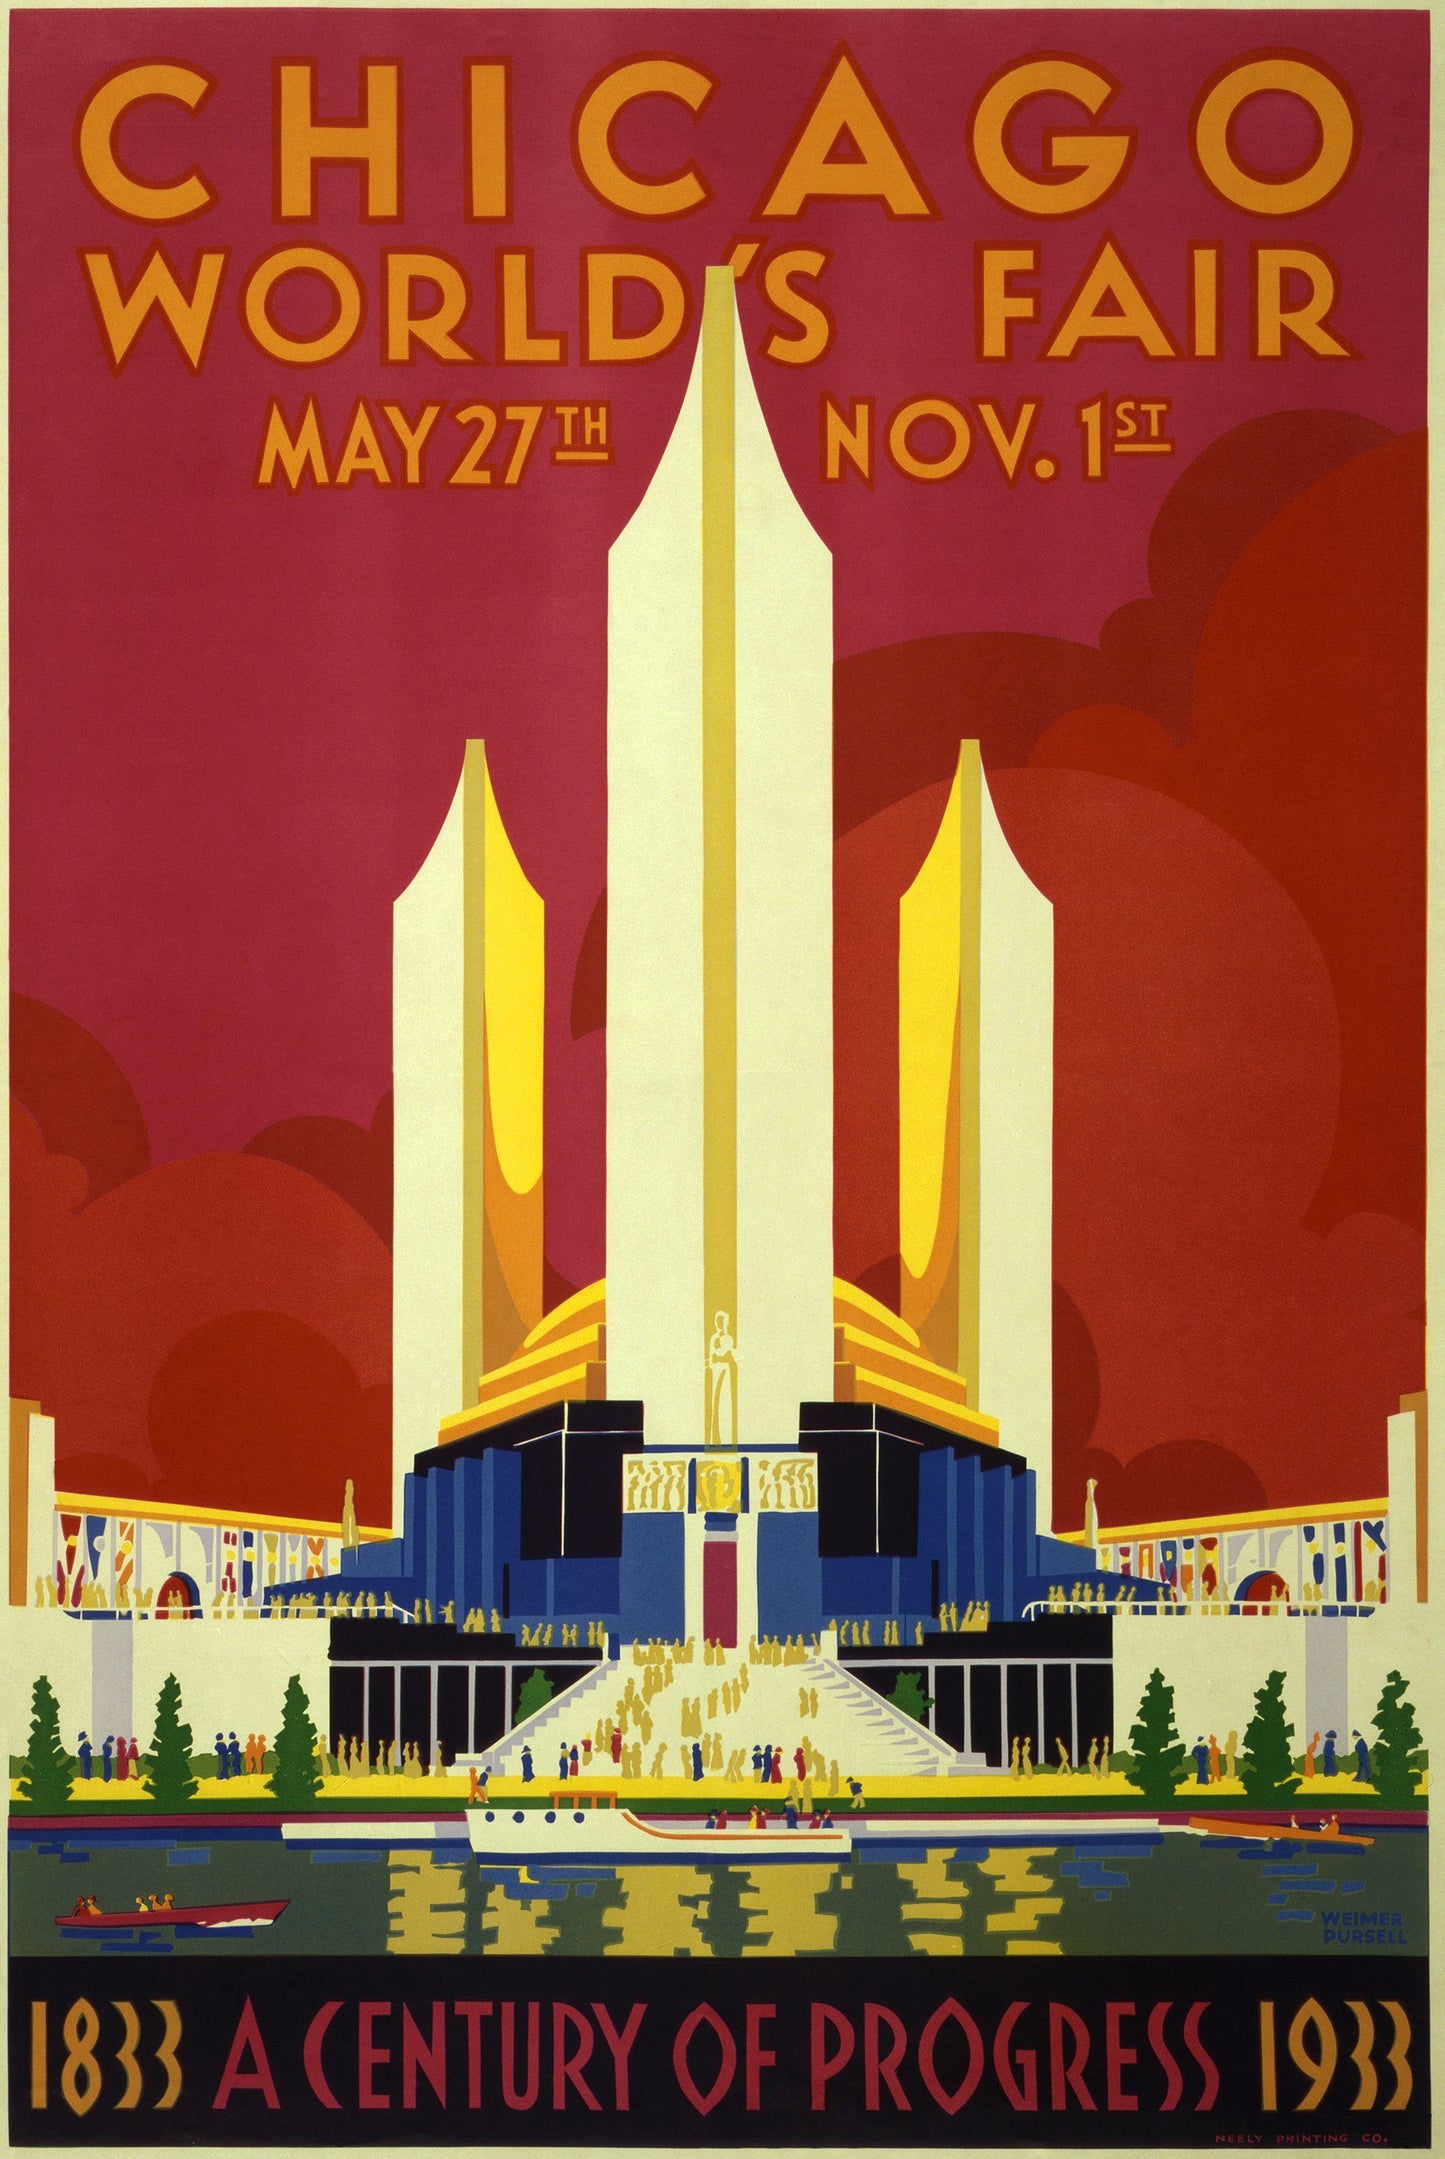 Chicago World’s Fair Poster (1930s) | Vintage travel posters Posters, Prints, & Visual Artwork The Trumpet Shop   